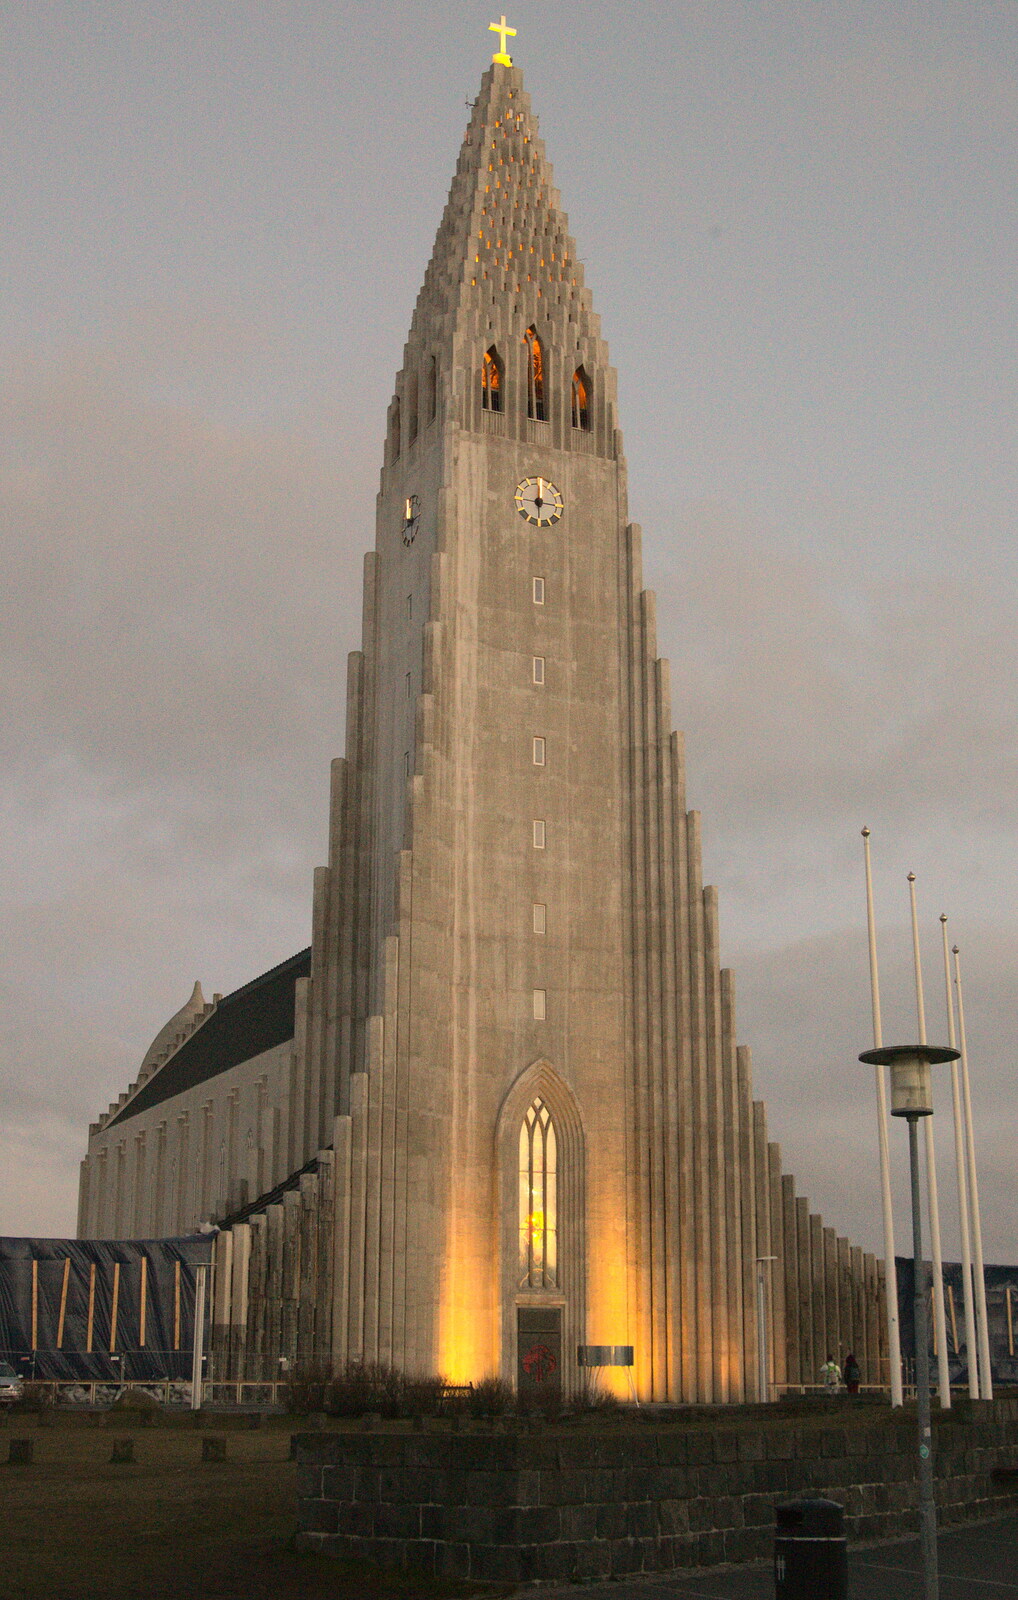 The famous Hallgrímskirkja cathedral in the dusk from A Trip to Reykjavik, Iceland - 20th April 2017